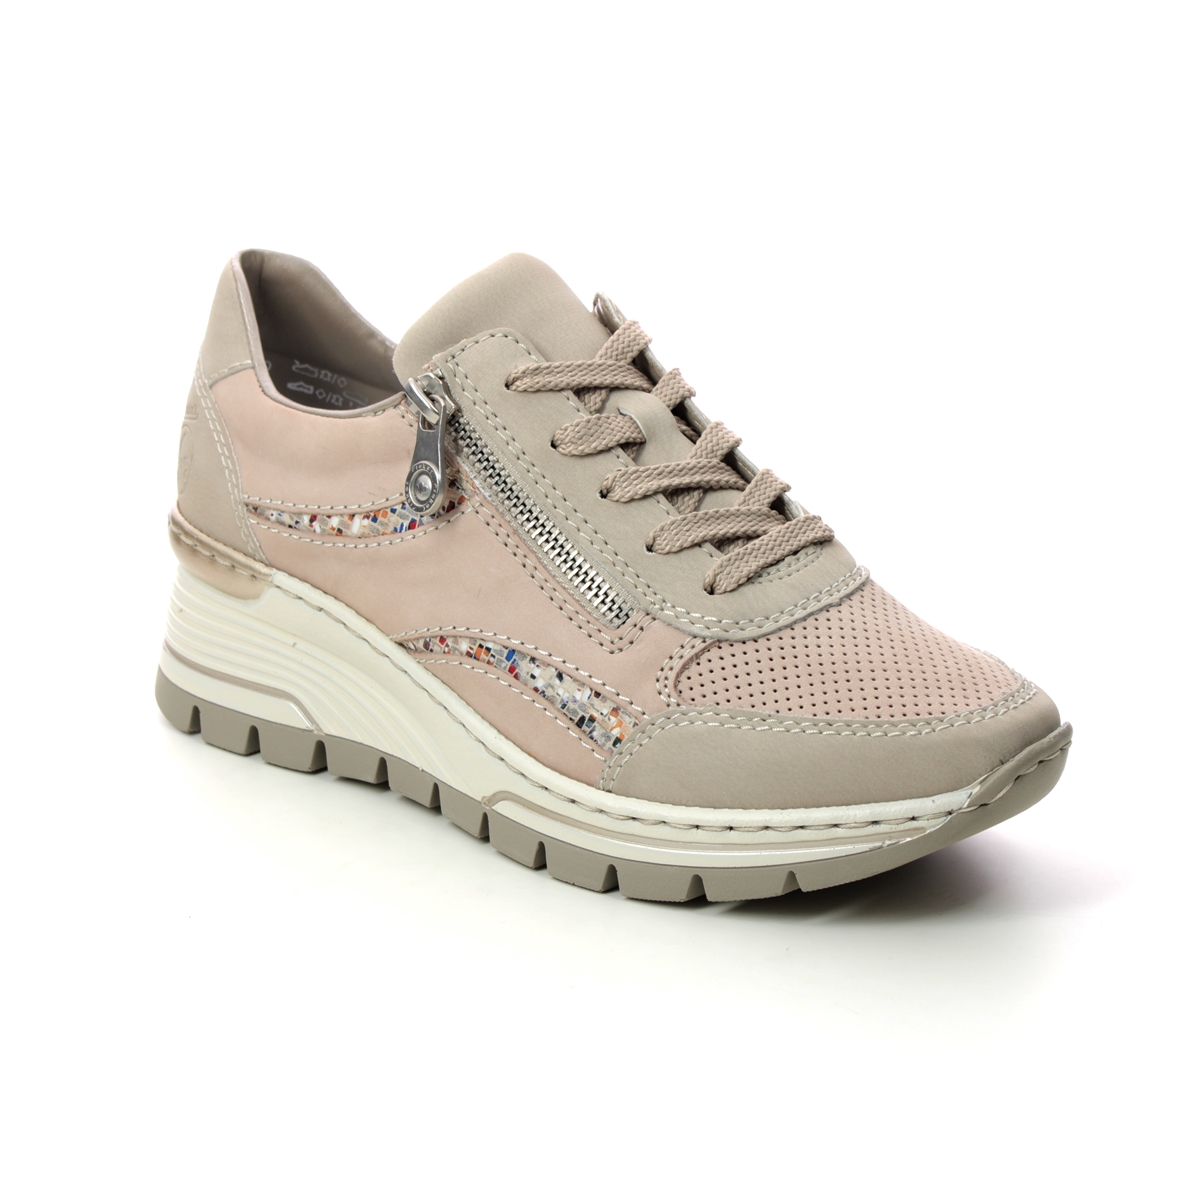 Rieker N8306-60 Beige leather Womens trainers in a Plain Leather and Man-made in Size 38